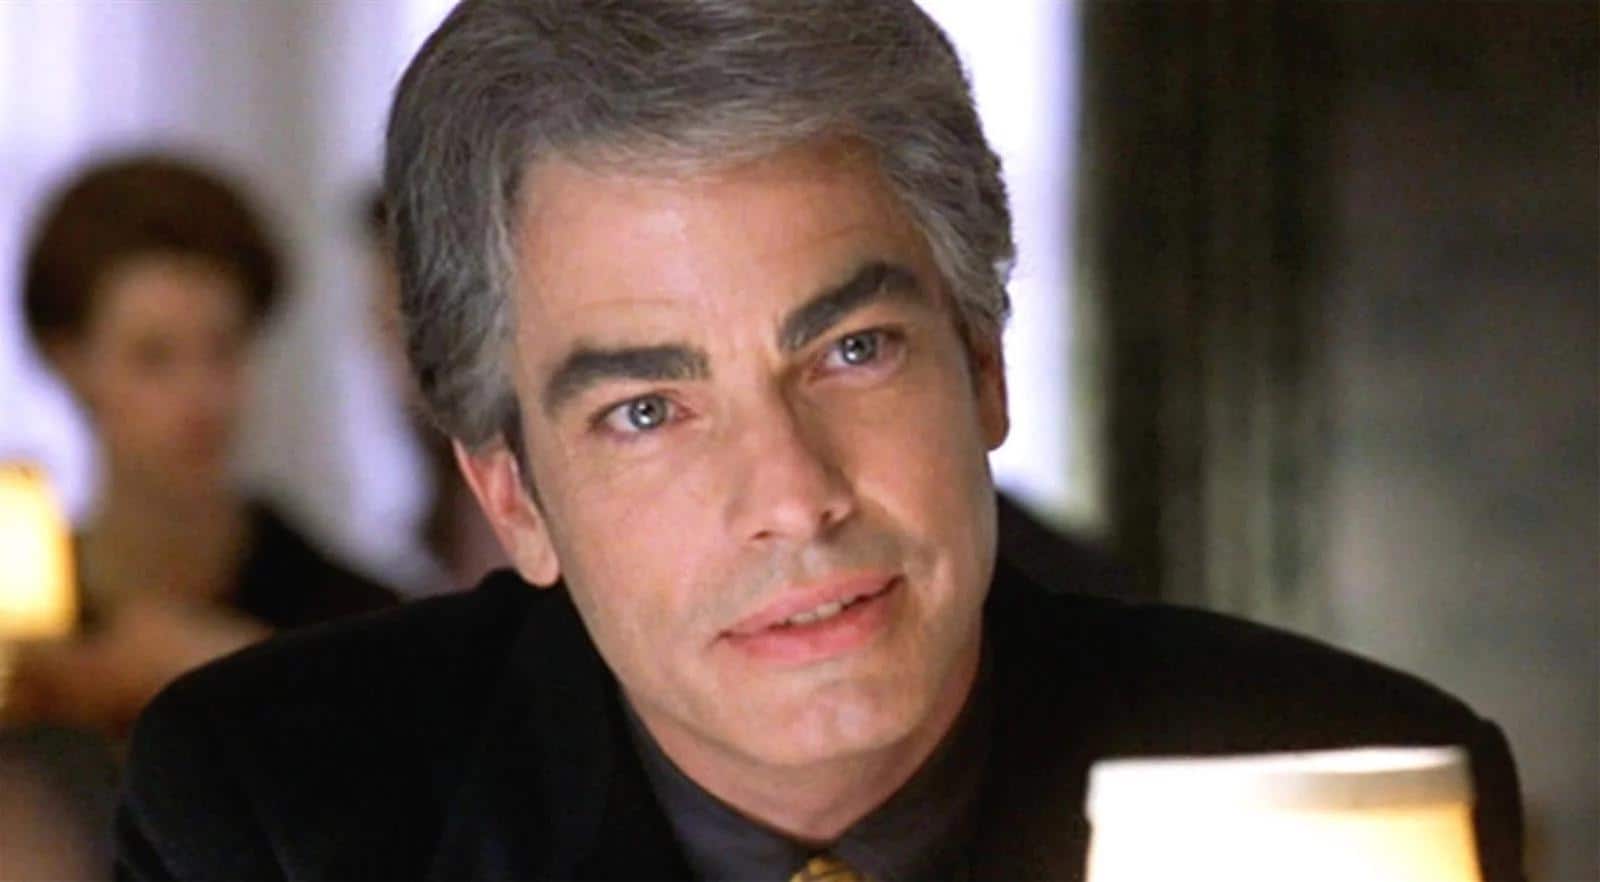 Peter Gallagher is a successful actor during the 1990s